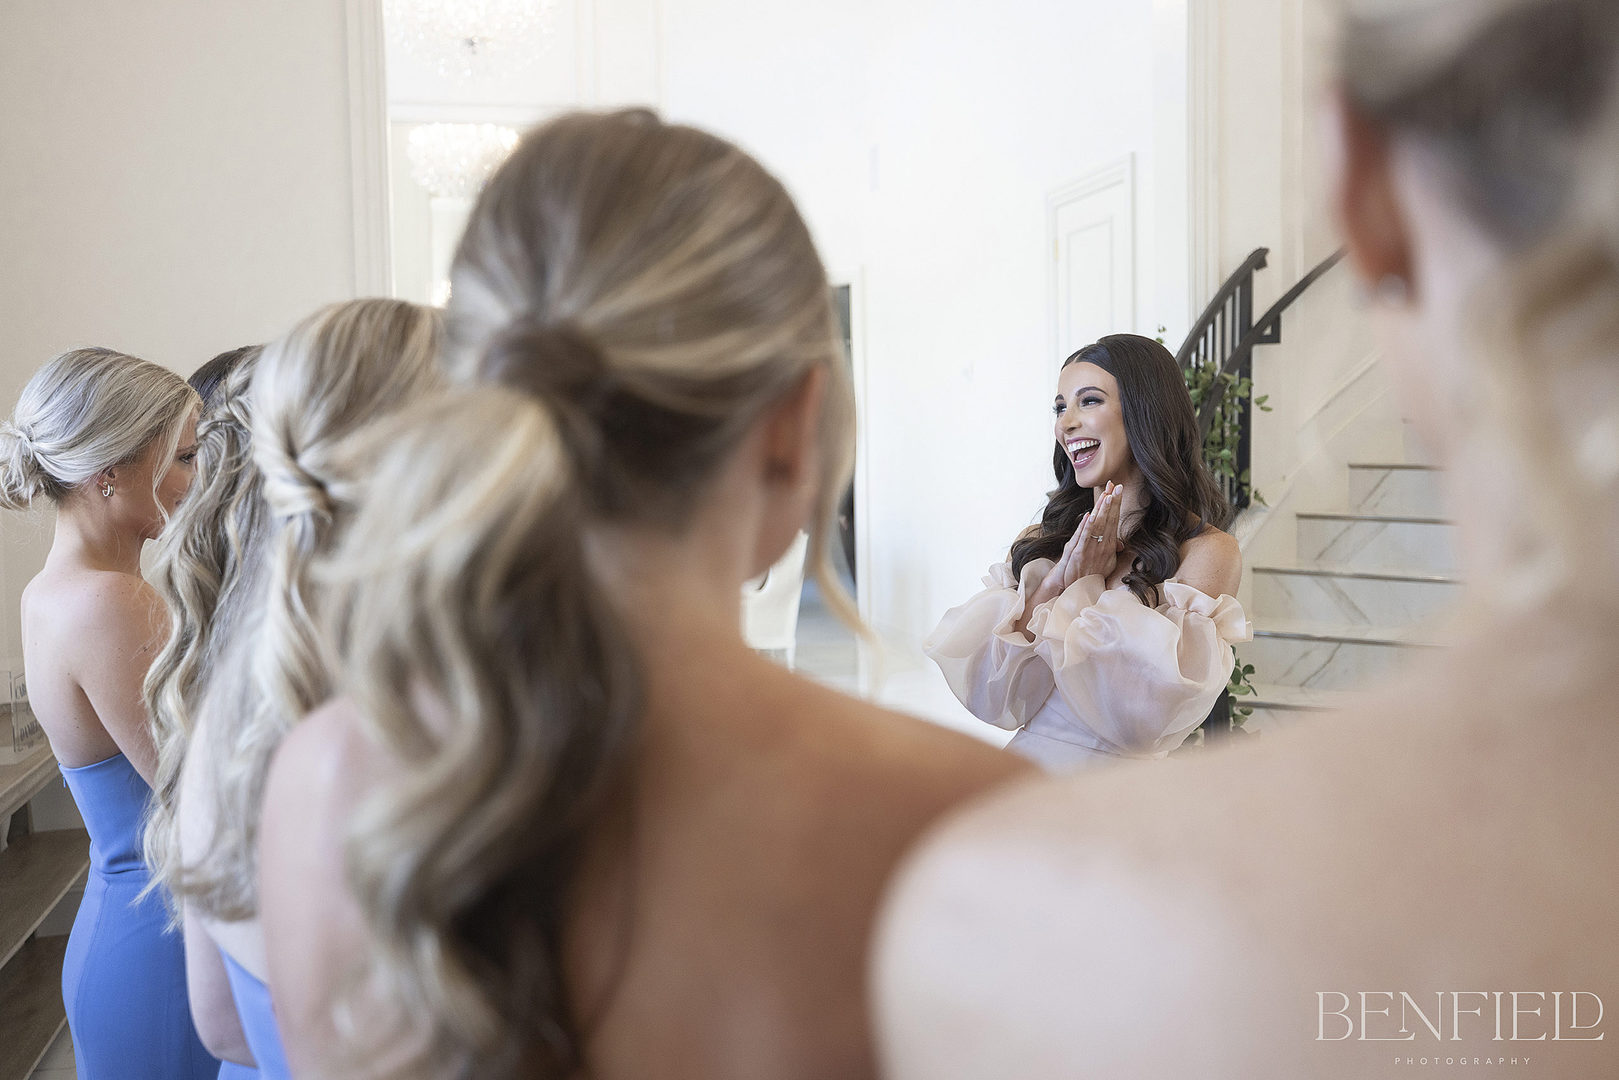 Designer Bride's first look with her bridesmaids on the wedding day as she descends the royal staircase at Hillside Estate in Texas